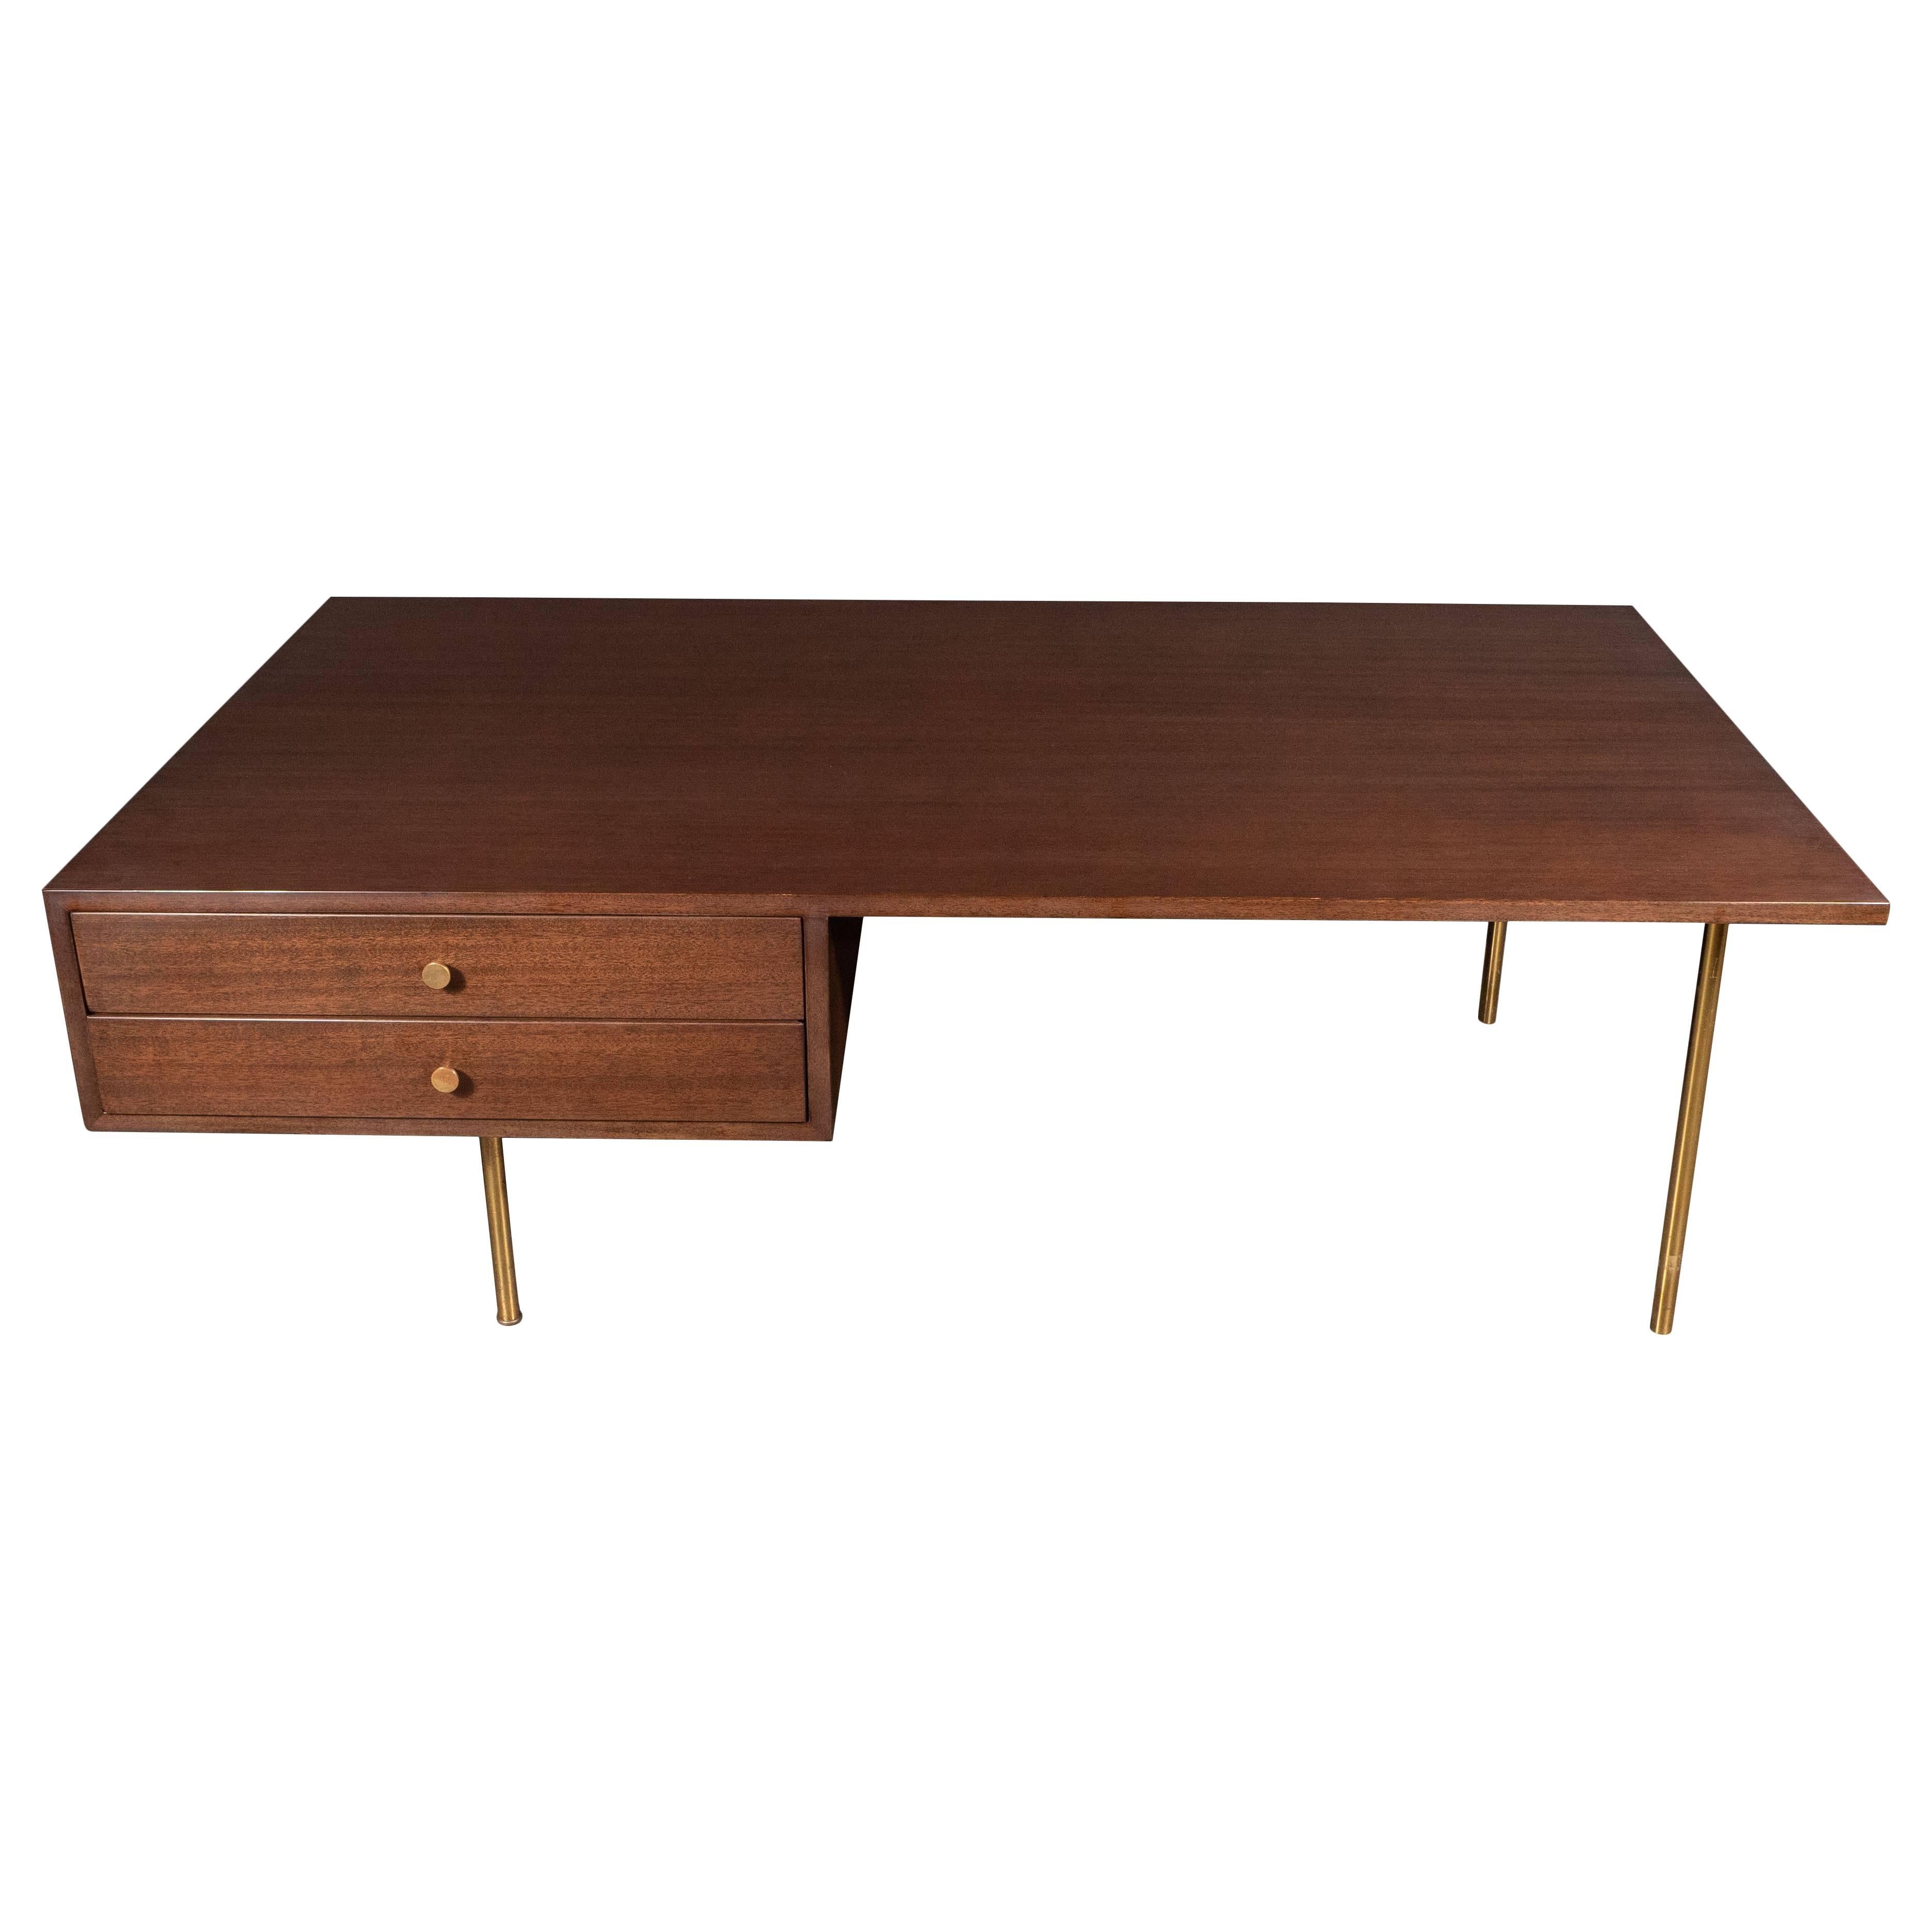 Mid-Century Modern Two-Drawer Cocktail Table in Walnut and Brass, Harvey Probber